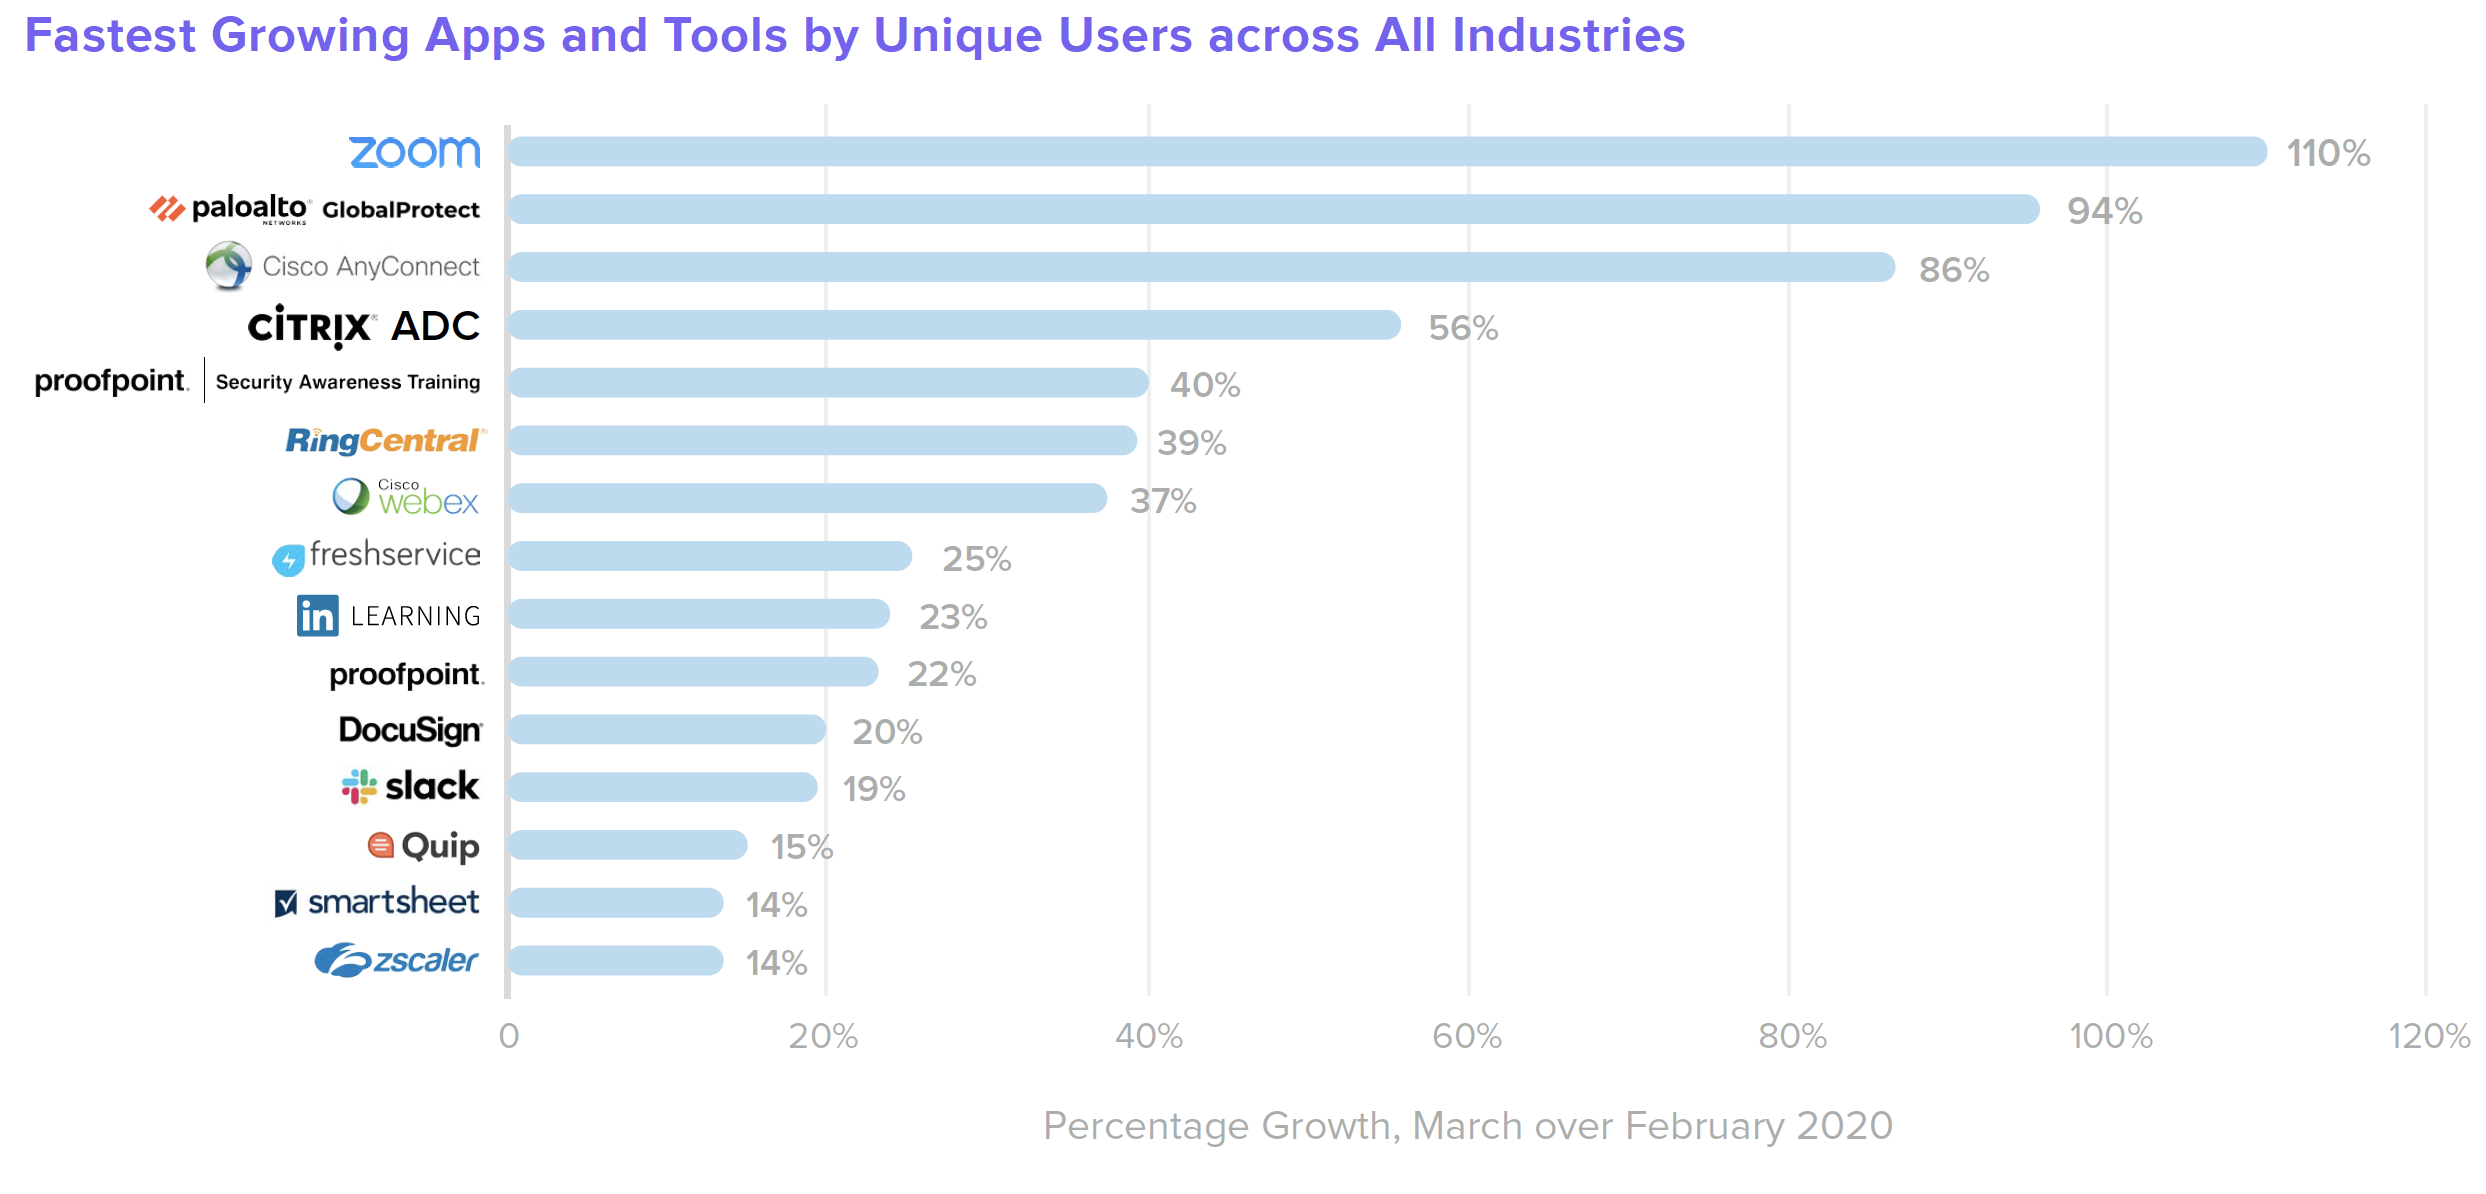 B W Education Fastest Growing Apps and Tools by Unique Users across All Industries